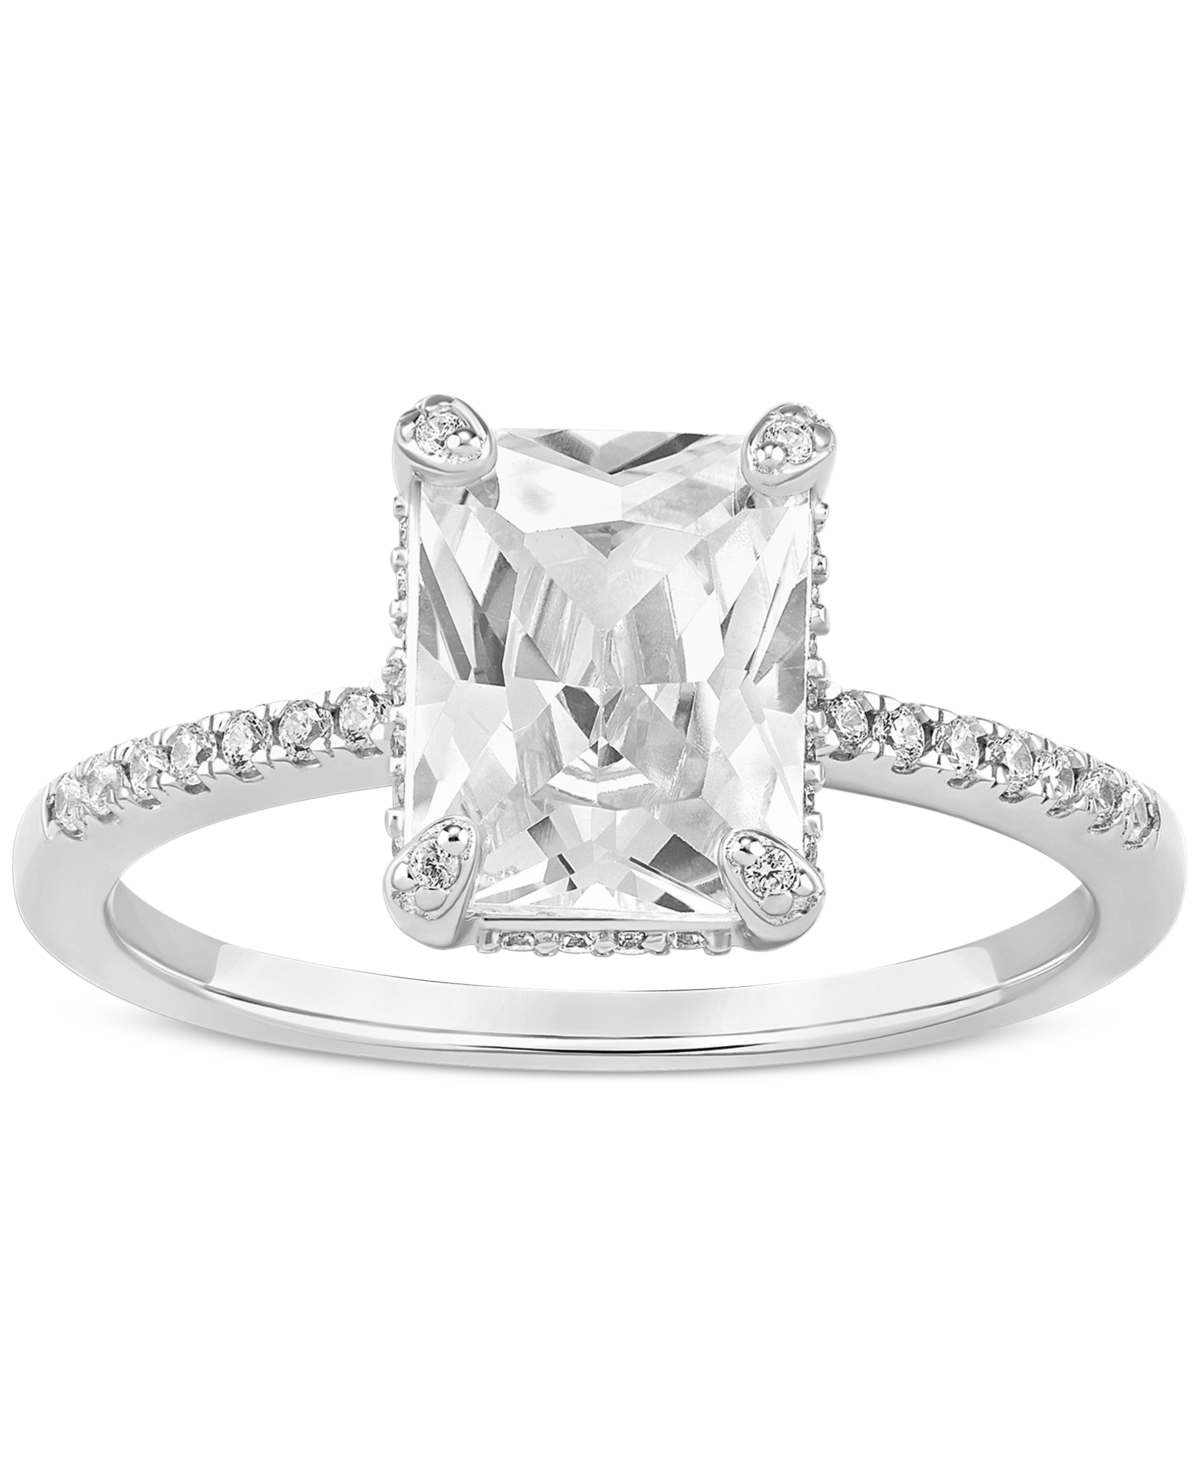 Cubic Zirconia Baguette & Pave Ring in Sterling Silver, Created for Macy's - Sterling Silver